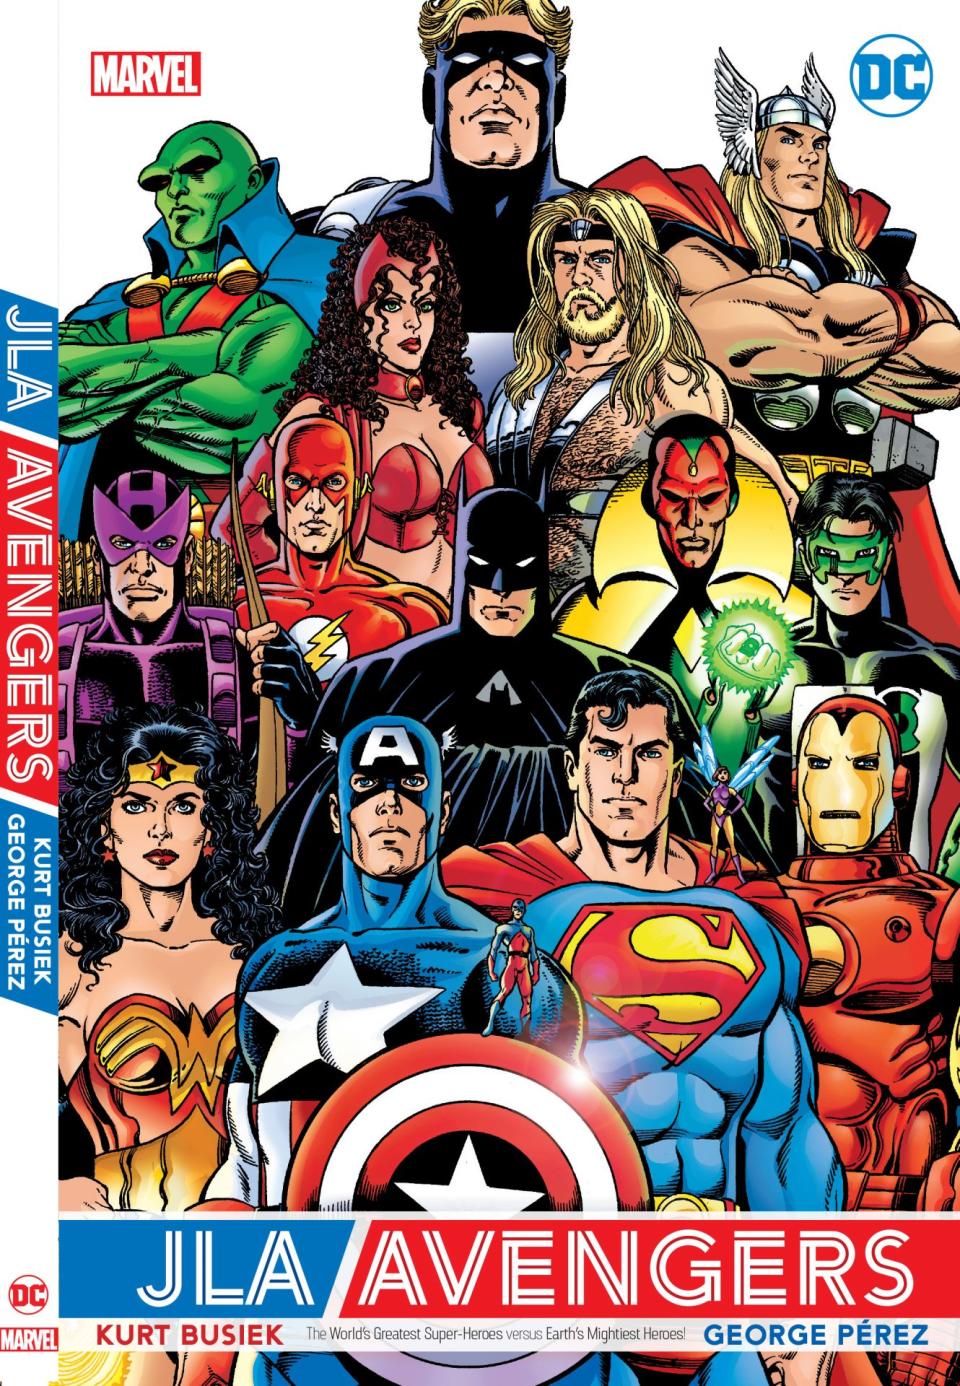 Cover art by George Perez for the 2022 edition of JLA/Avengers